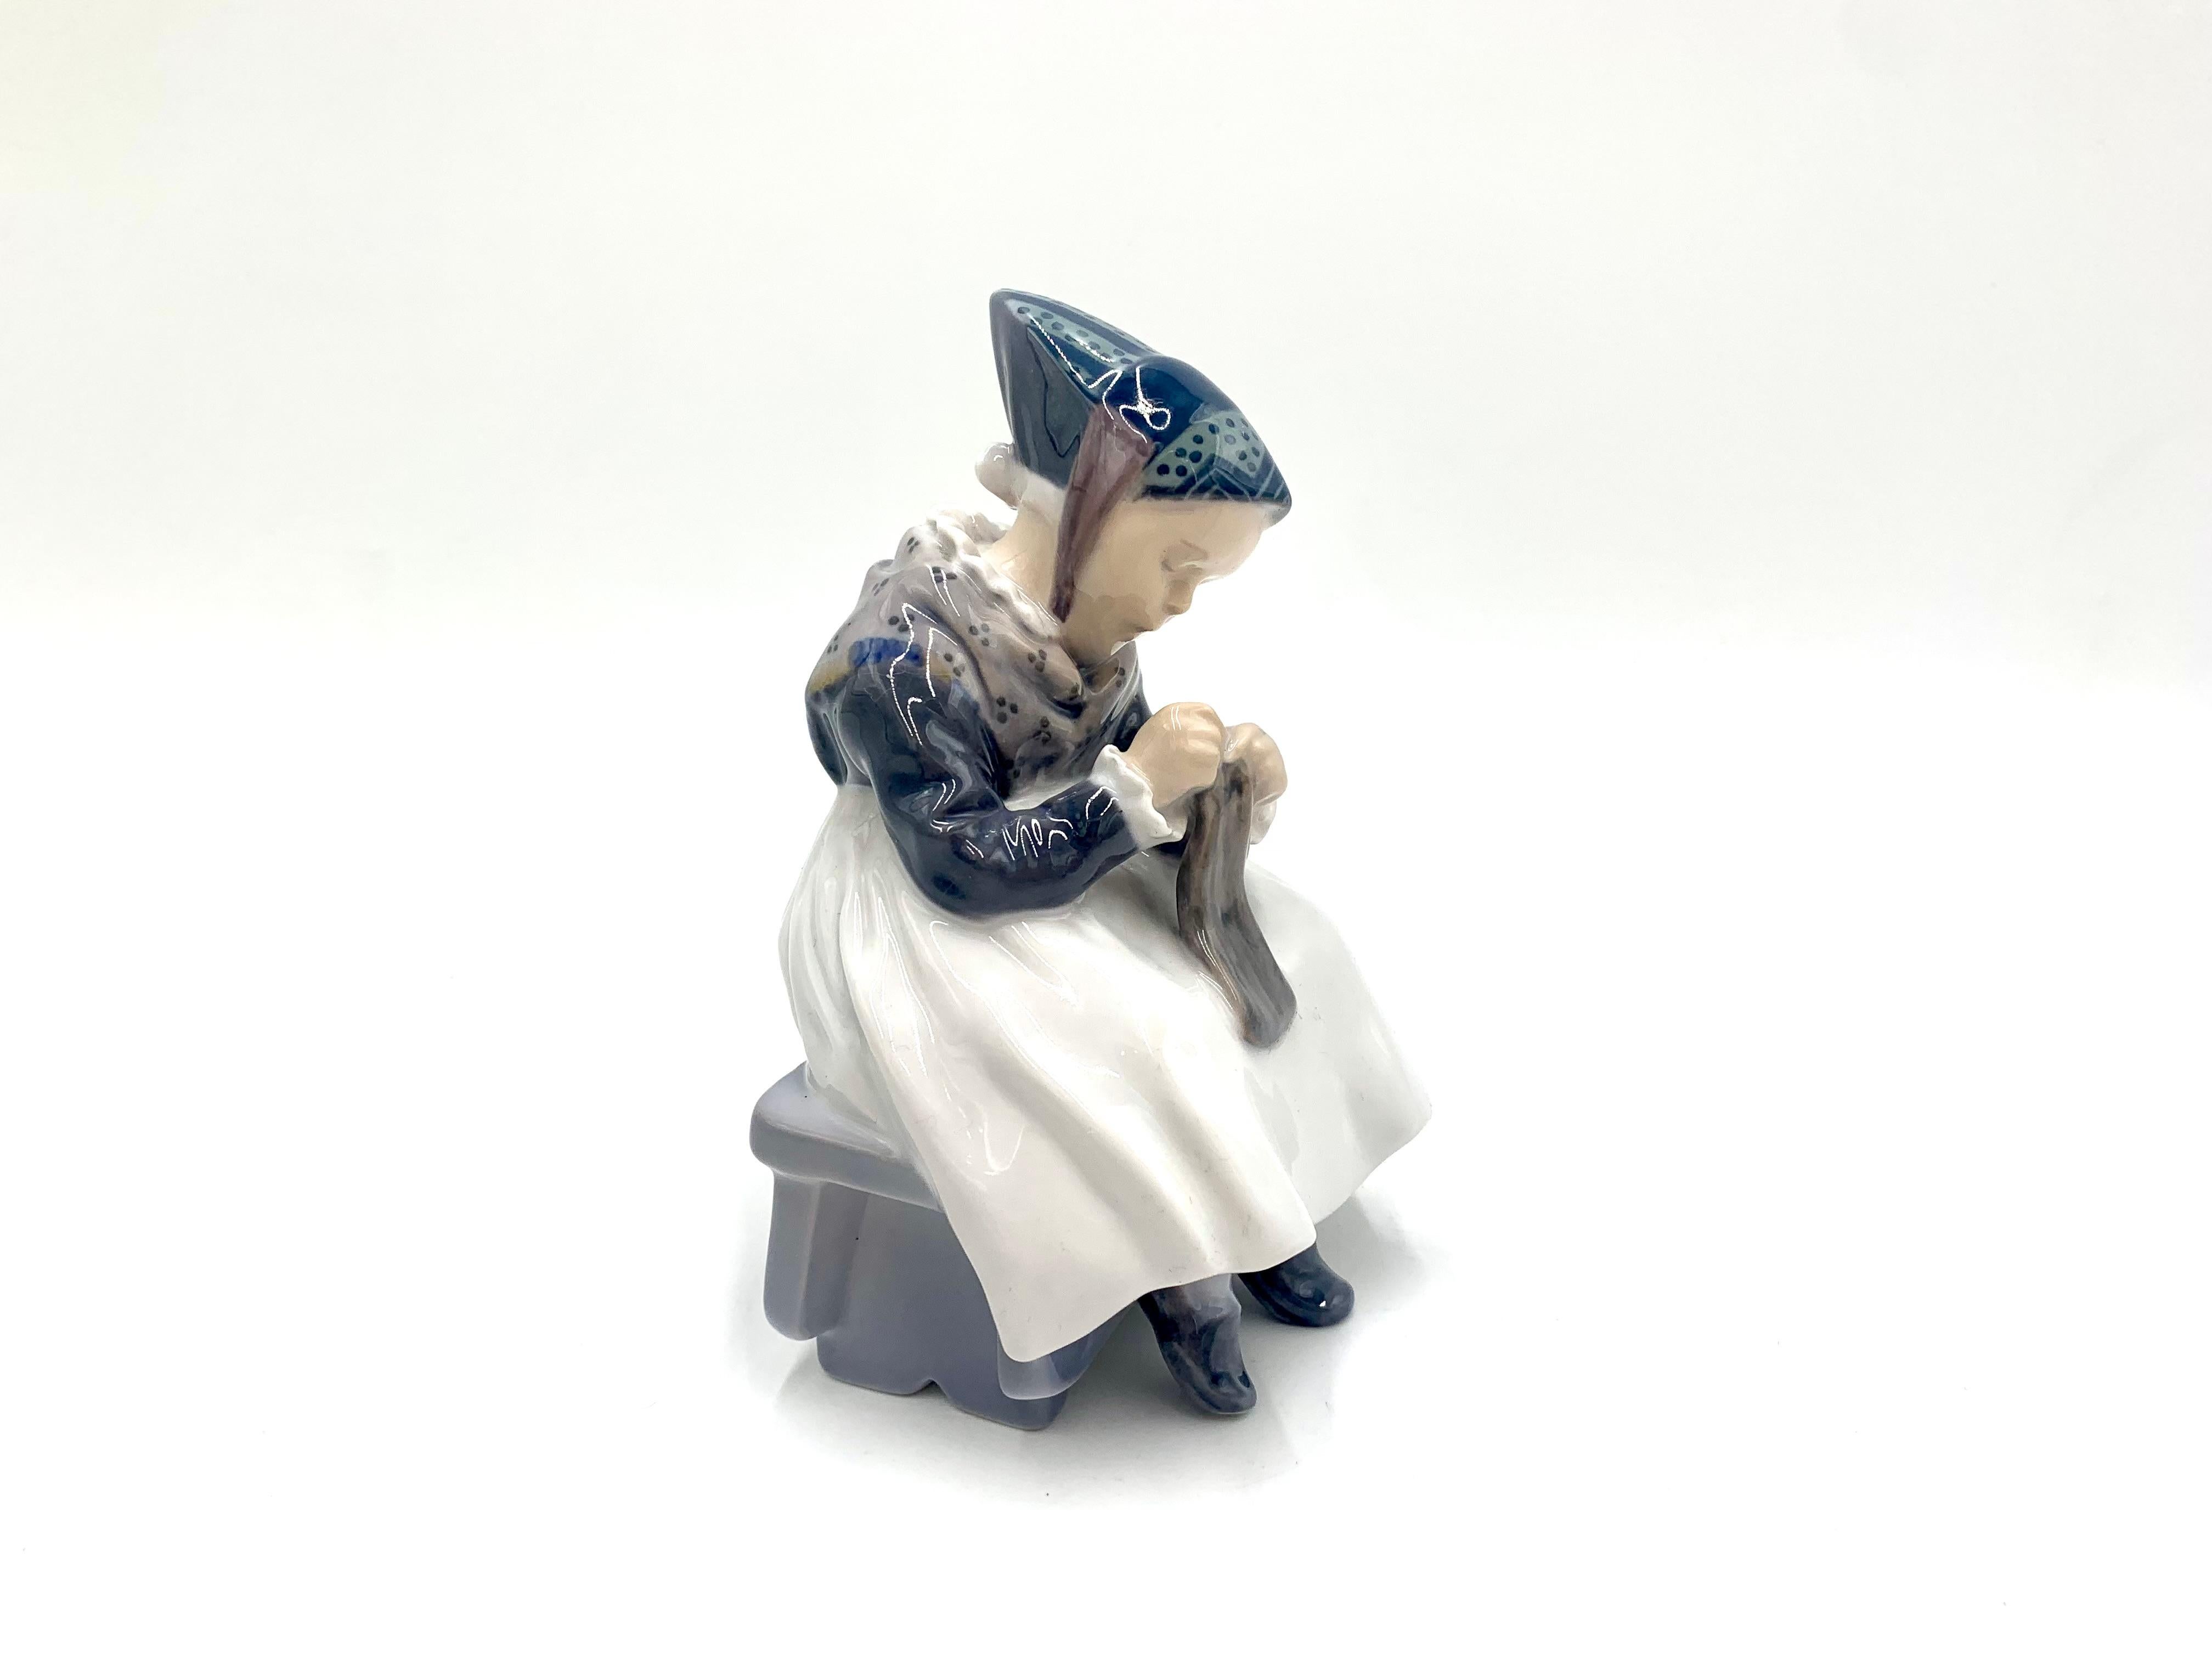 Porcelain figurine of a sewing woman in regional costume.

Made in Denmark by the Royal Copenhagen manufactory

Produced in 1957r.

Model number # 1314

Very good condition, no damage.

Measures: height 15cm, width 10cm, depth 9cm.